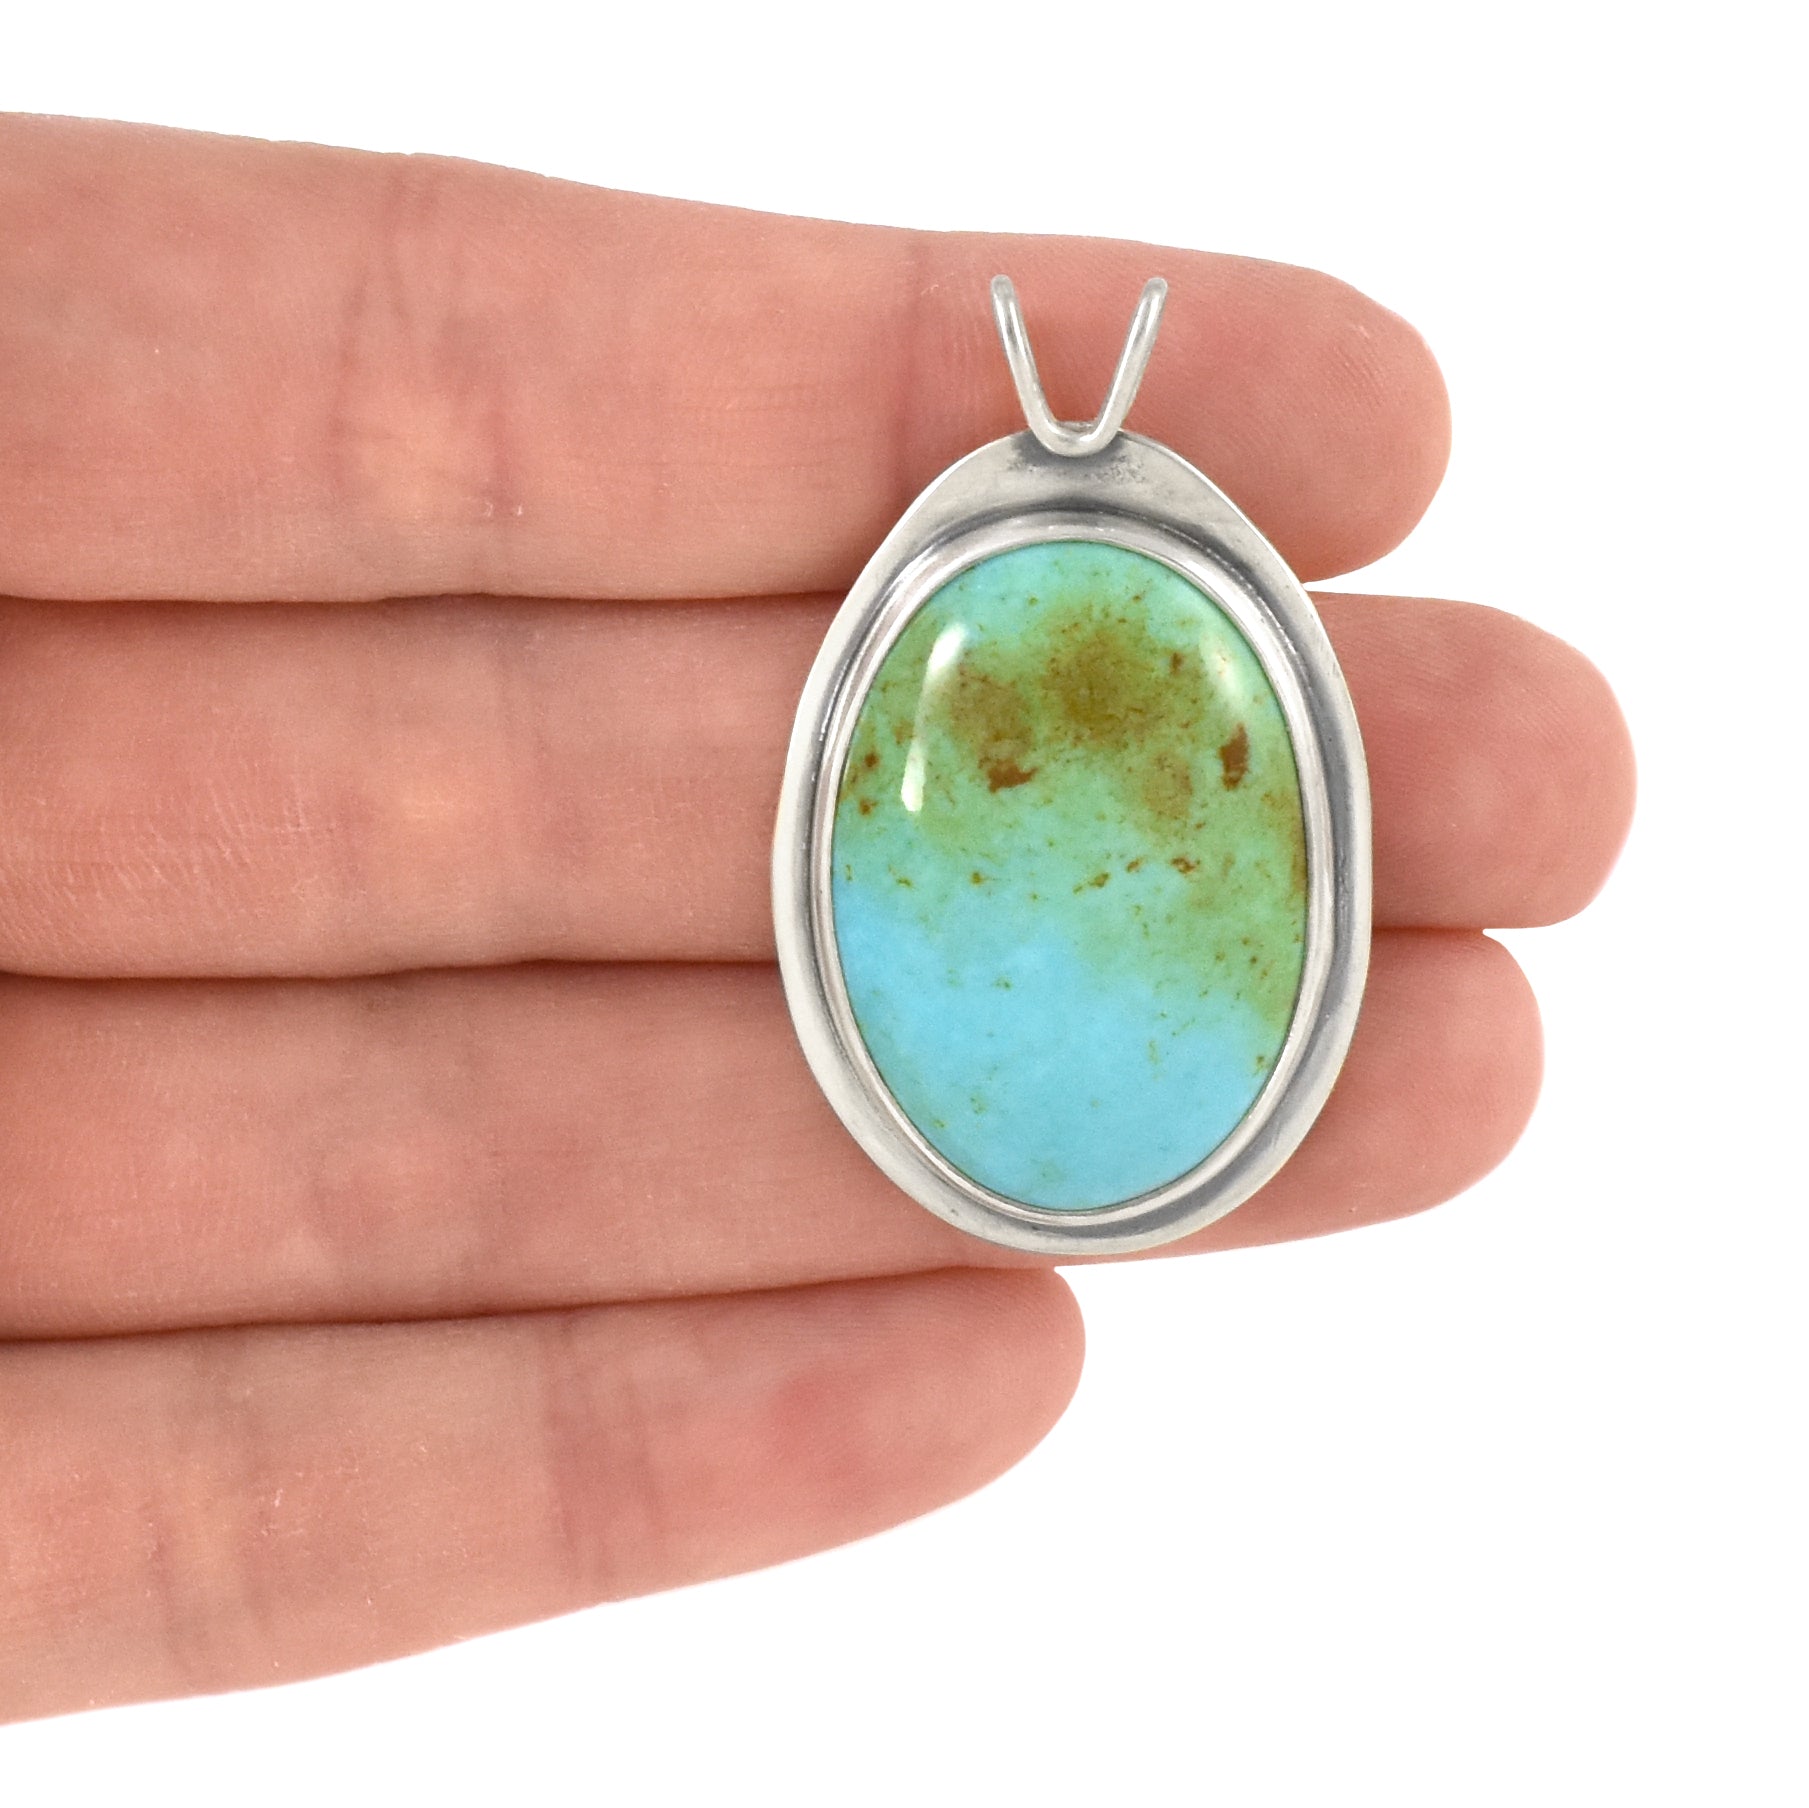 Turquoise Drop Pendant - Silver Pendant   6590 - handmade by Beth Millner Jewelry